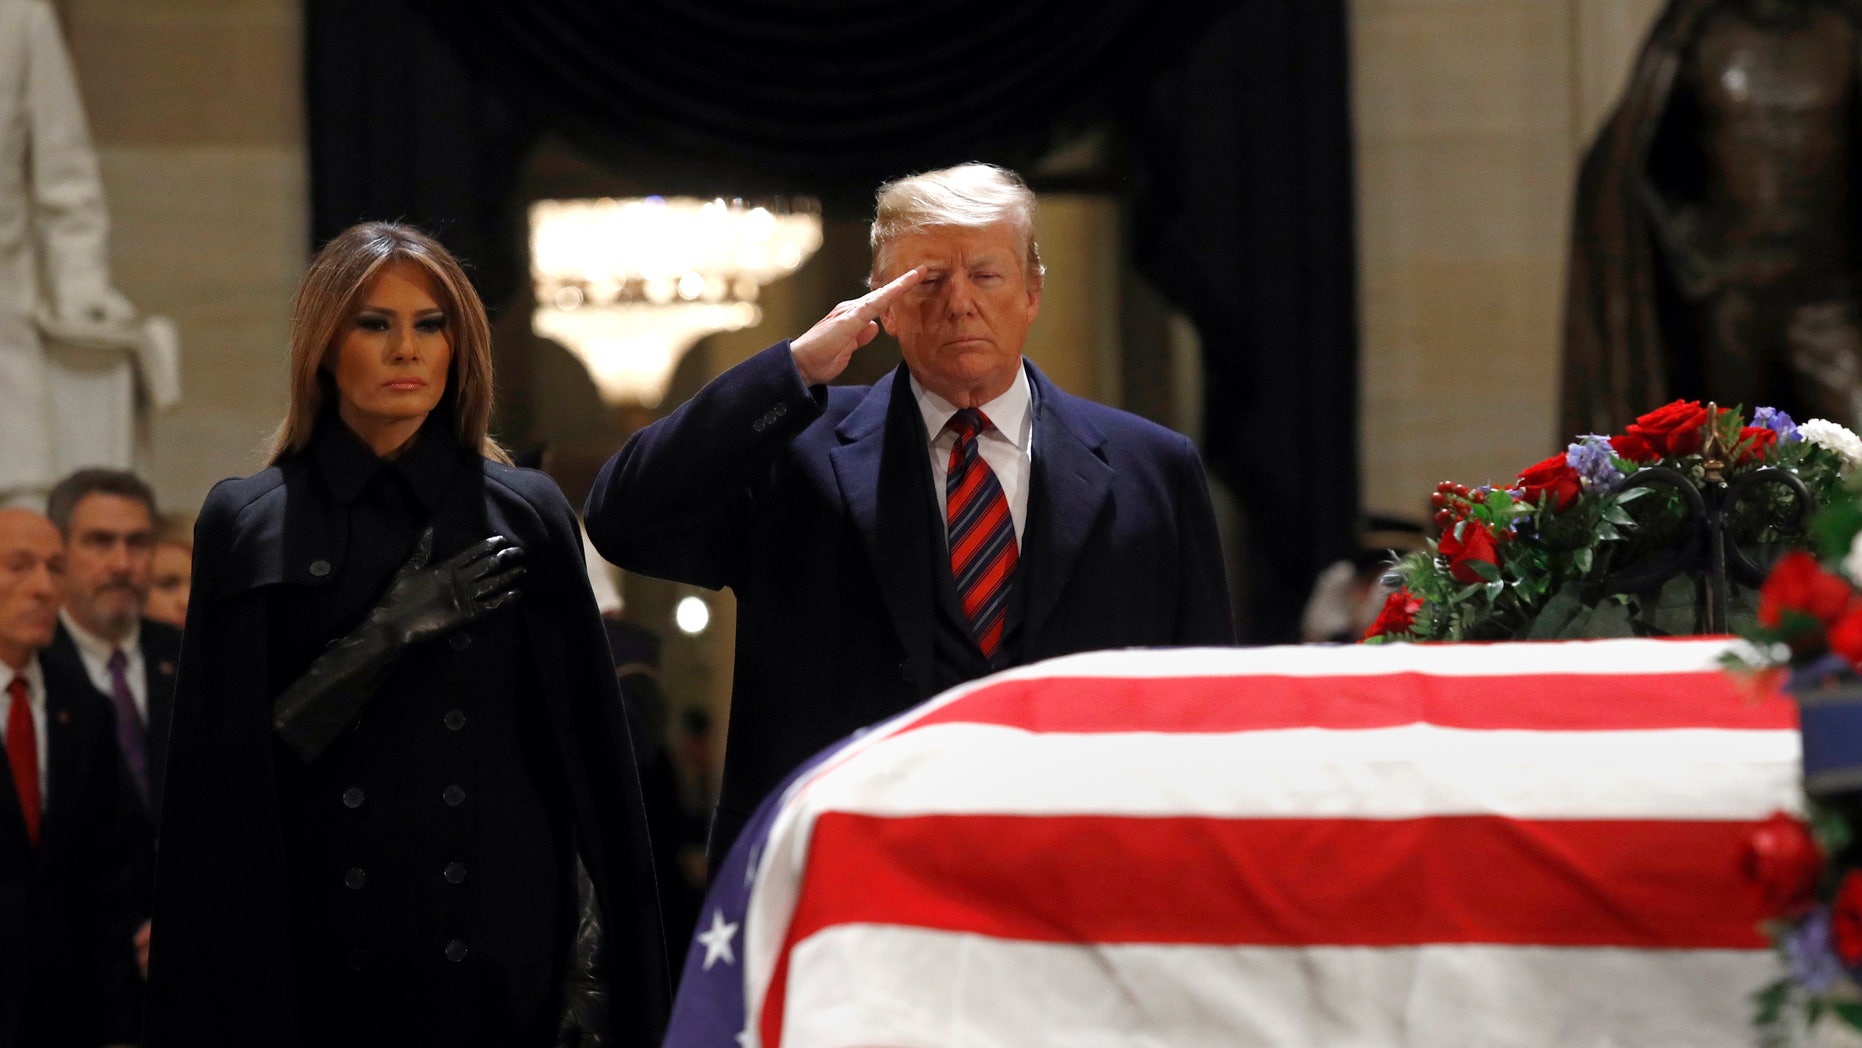 Abc News Imagining Of President Trumps Vision For His Own Funeral